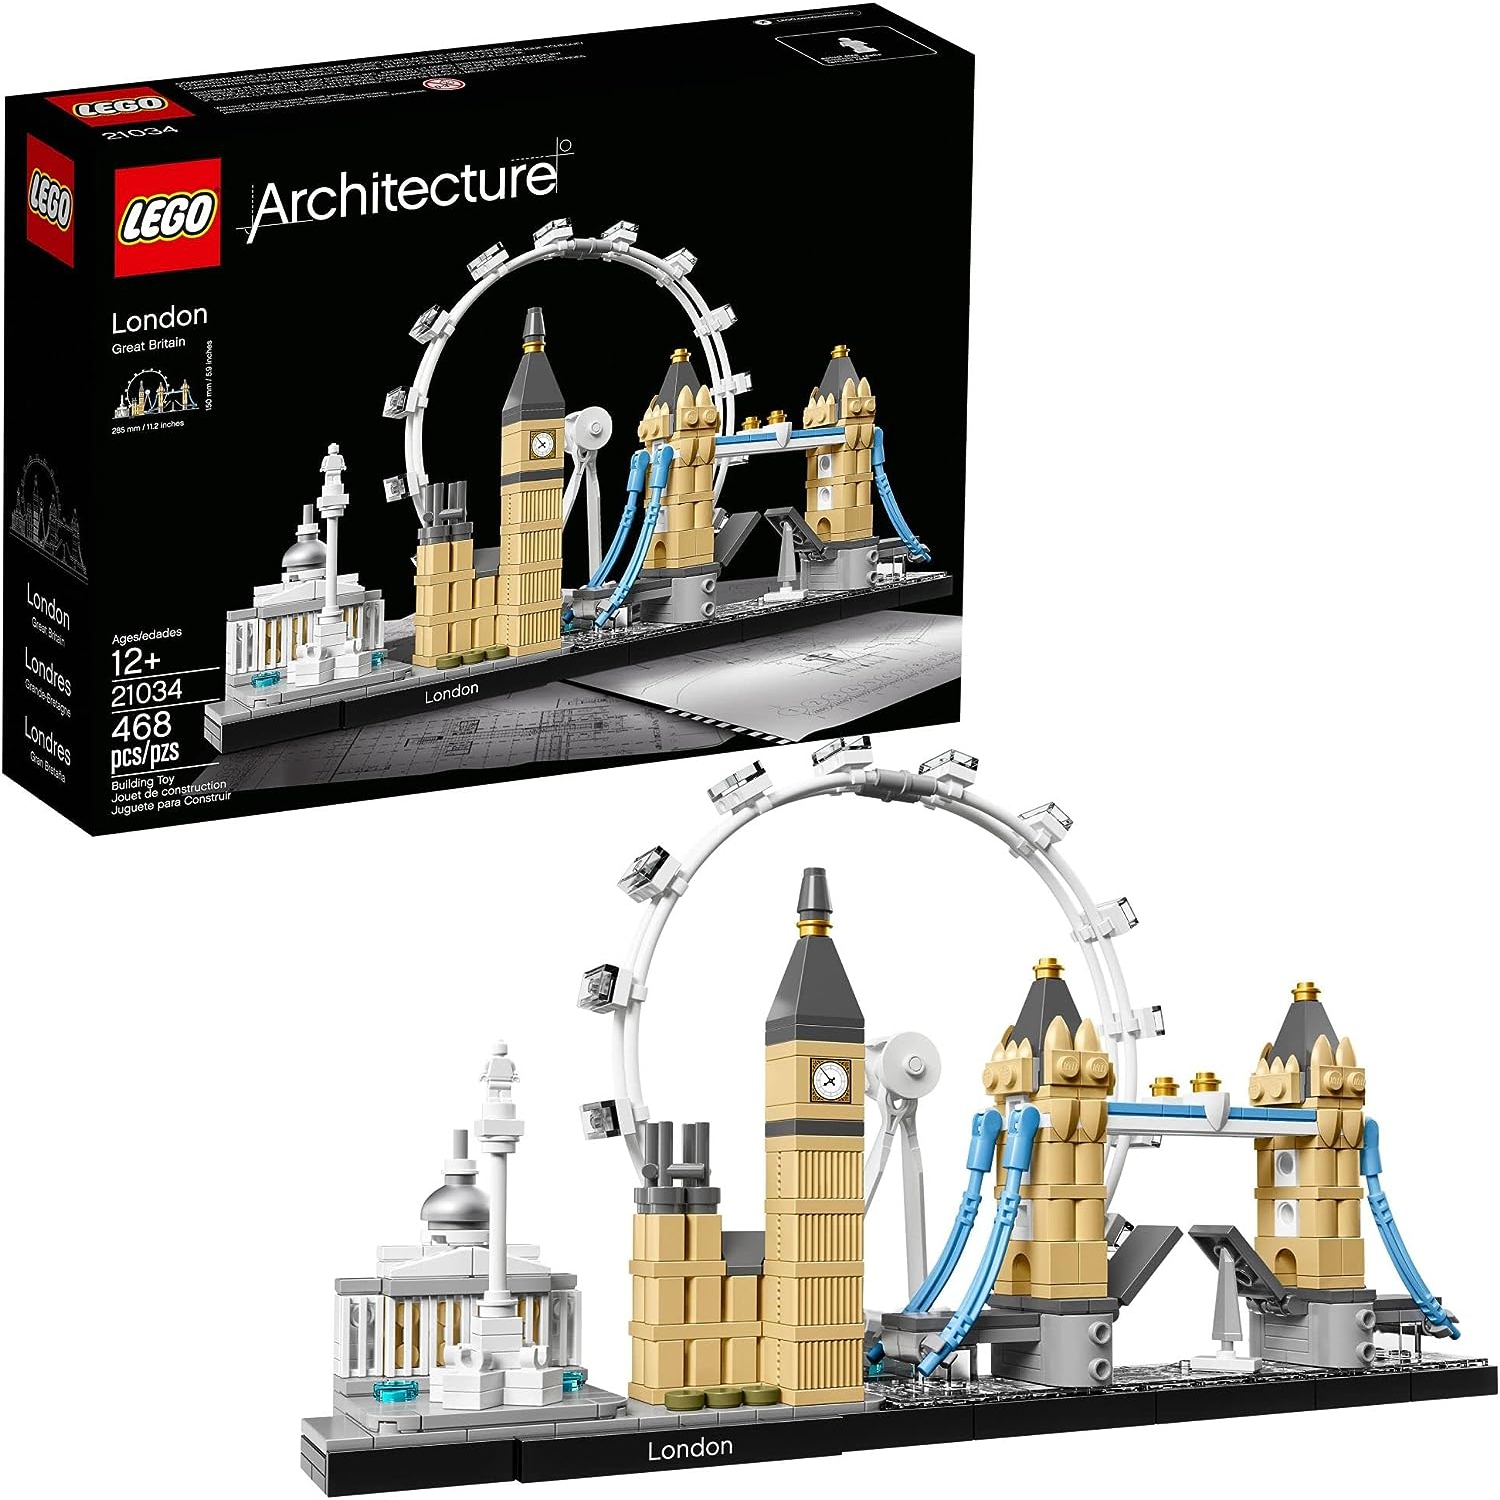 LEGO Architecture London Skyline 21034 Collectible Model Building Kit with London Eye, Big Ben, and Tower Bridge, Office Home Décor, Skyline Collection